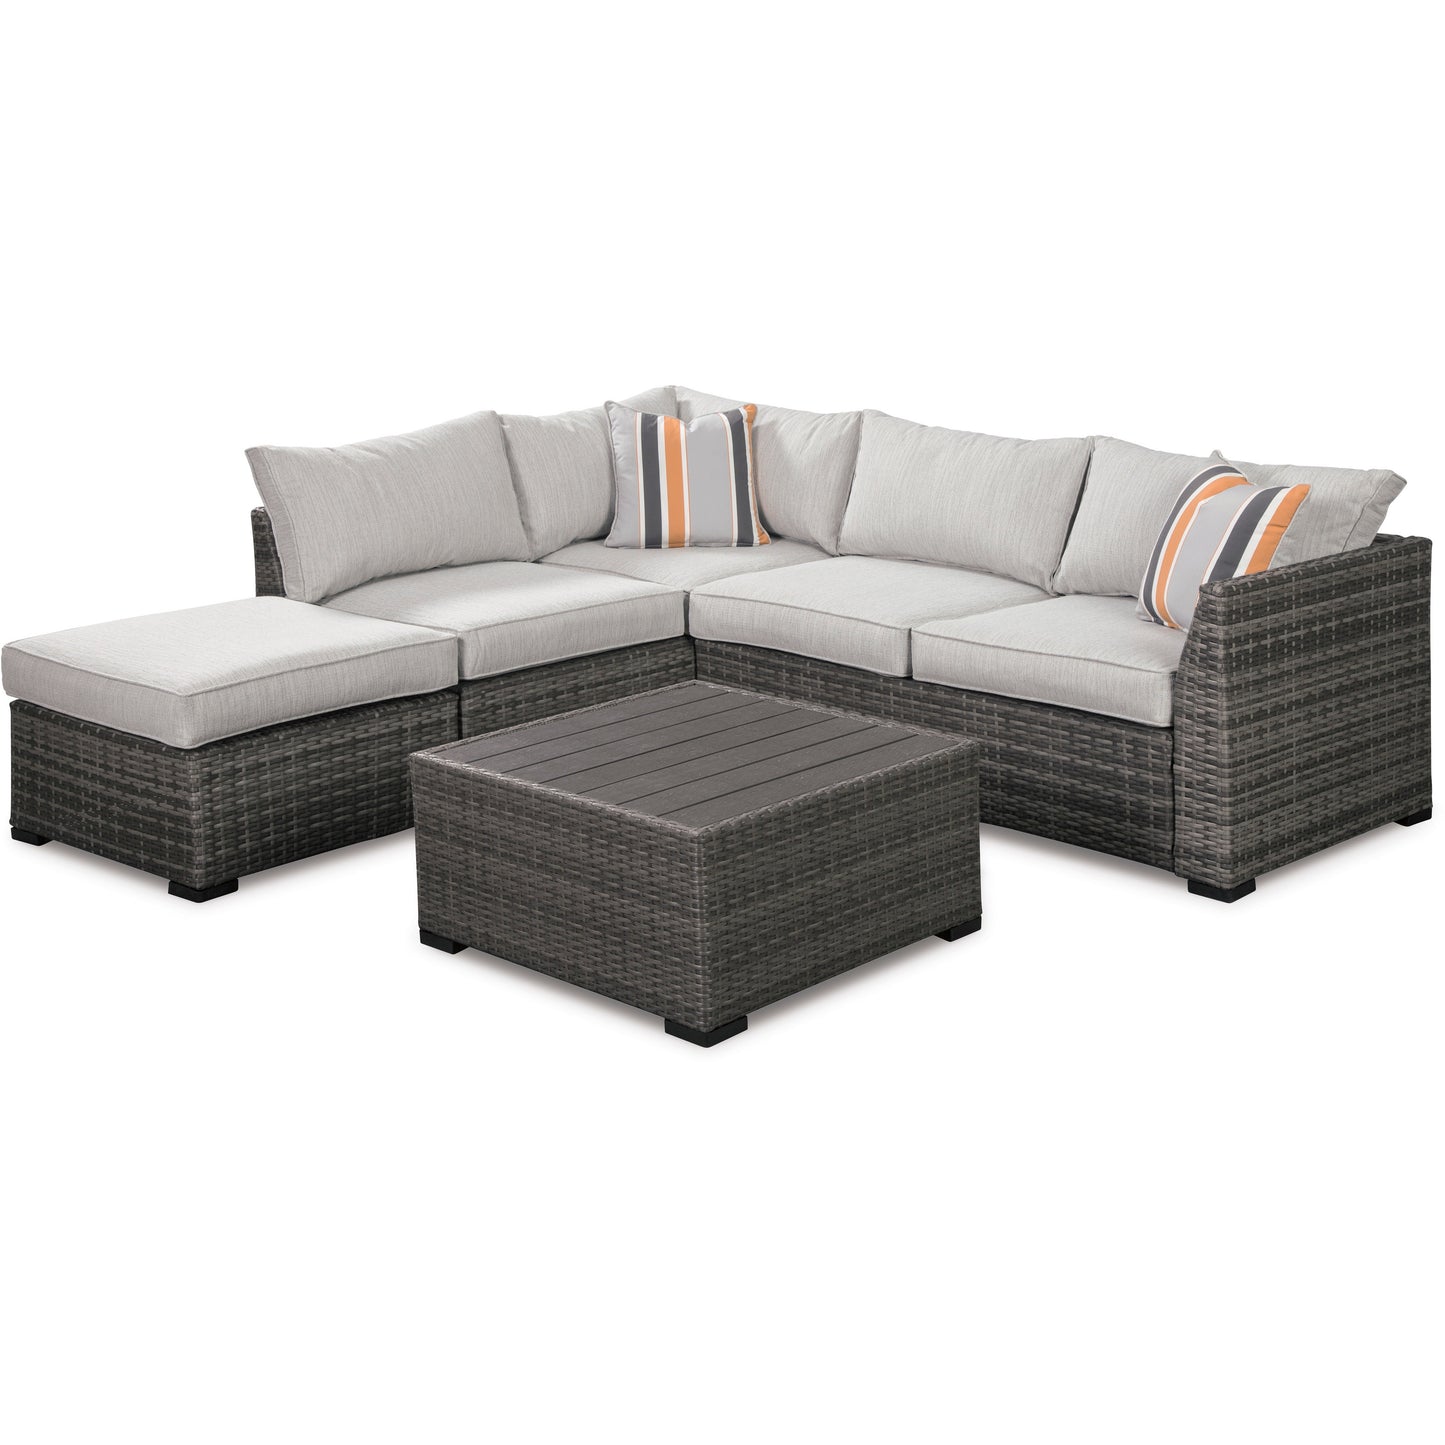 CHERRY POINT 4-PIECE OUTDOOR SECTIONAL SET